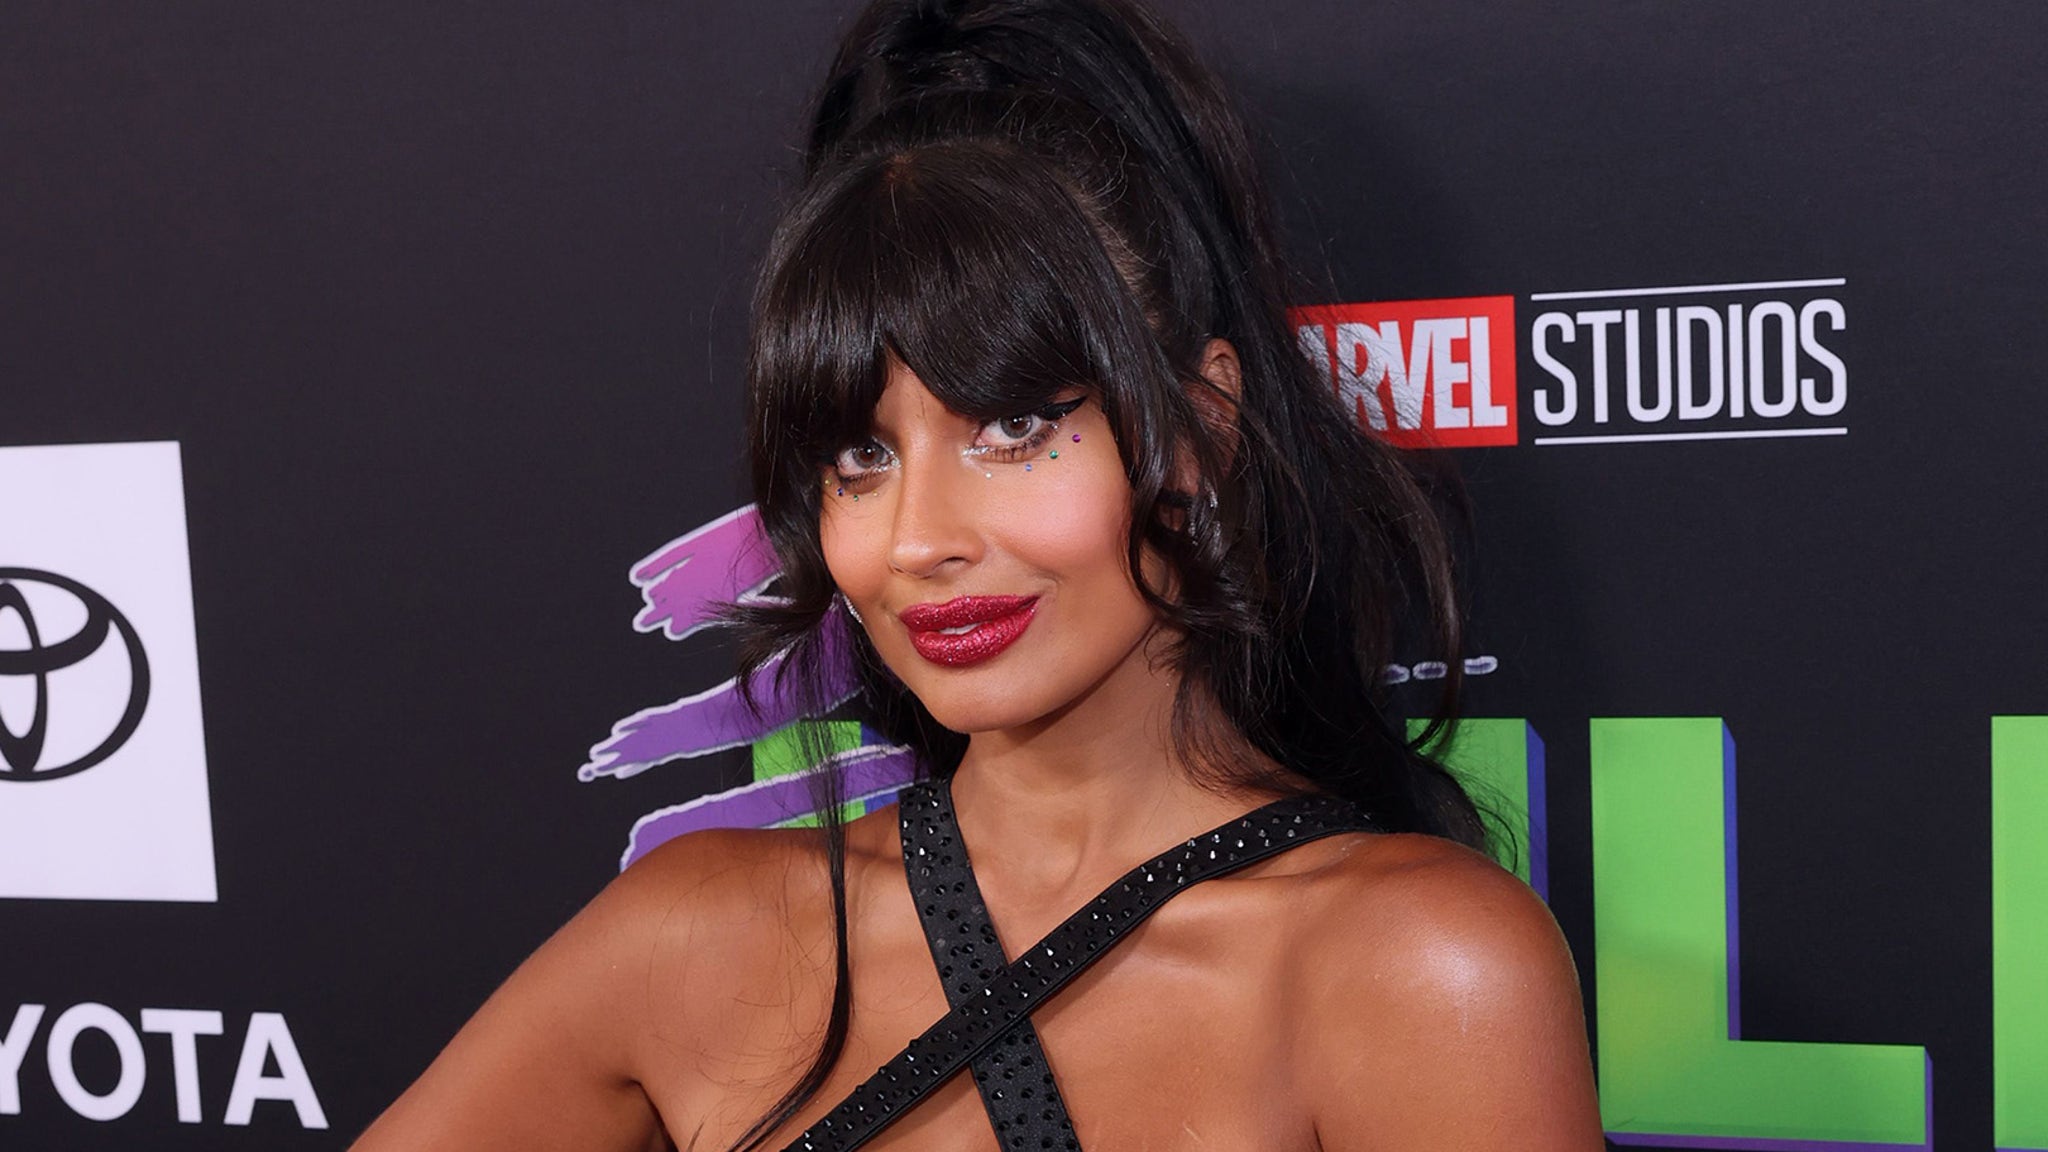 Jameela Jamil Is 'Fine' with Fans Not Liking She-Hulk, Not So Much the 'Hostile' Attacks 